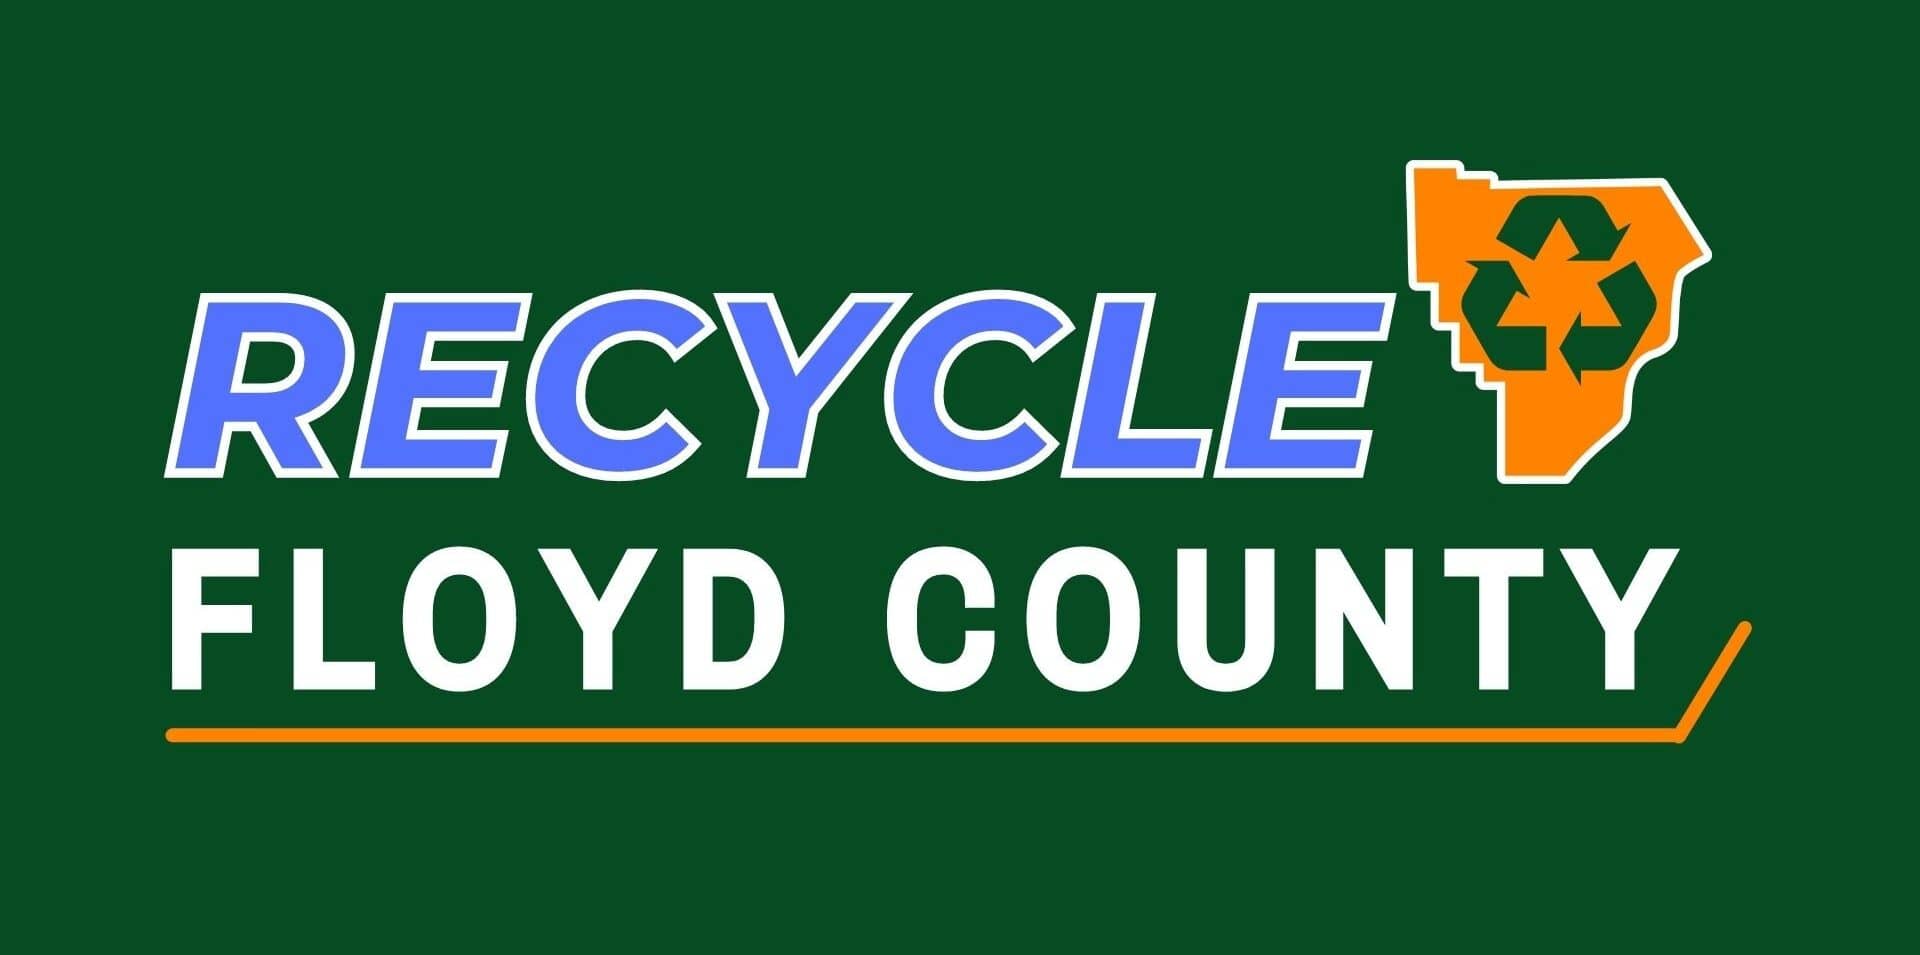 Floyd County Recycles